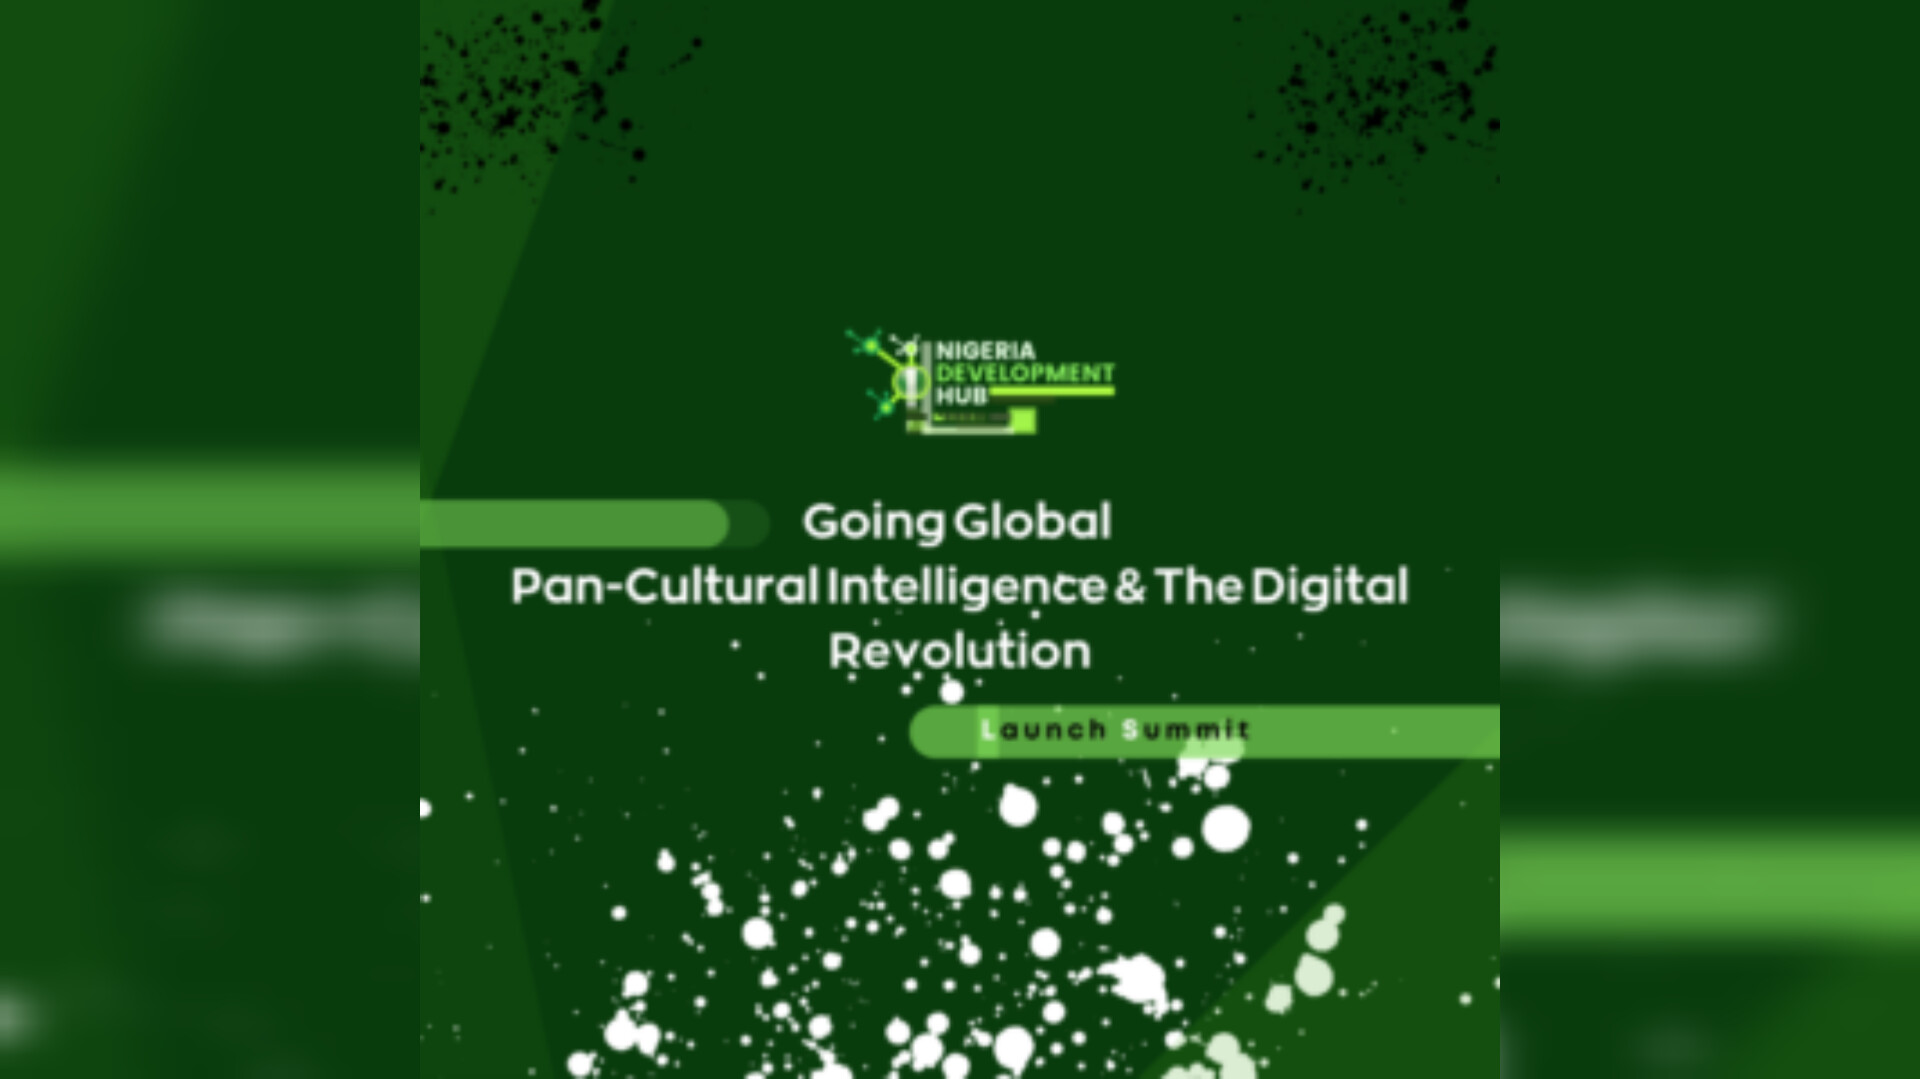 NDH hosted its virtual Launch Summit titled 'Pan-Cultural Intelligence & the Digital Revolution'...